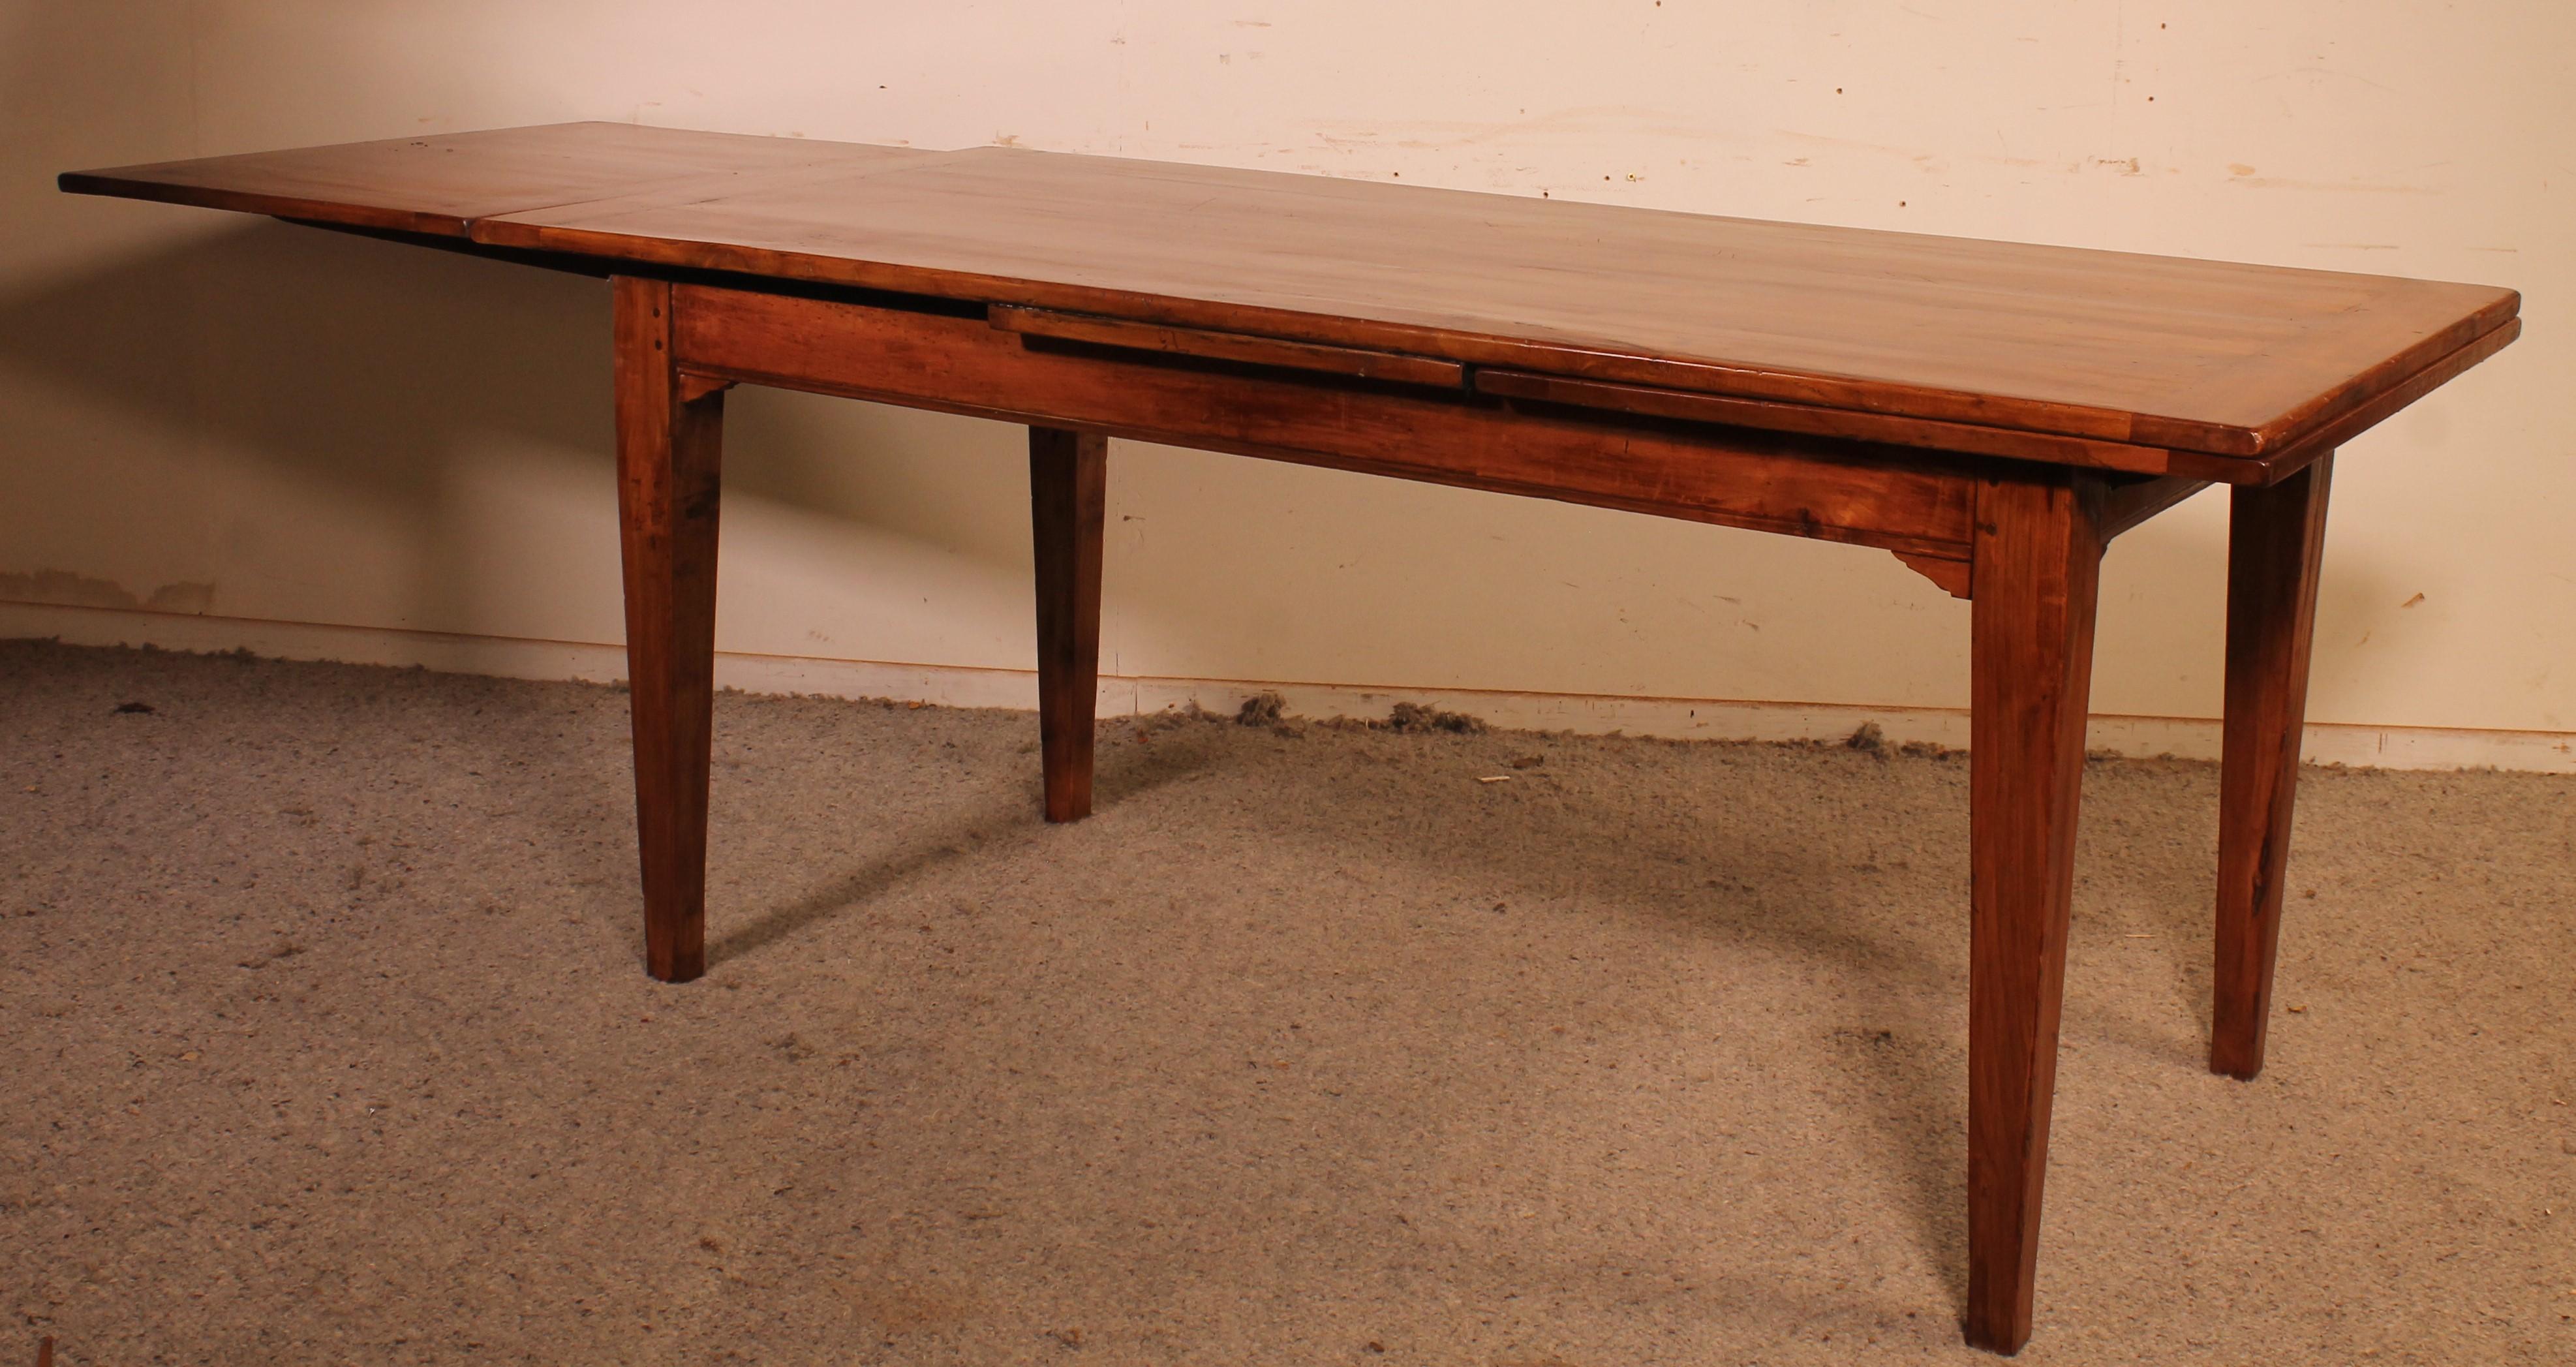 Small Extendable Table in Cherry Wood from the 19th Century For Sale 5